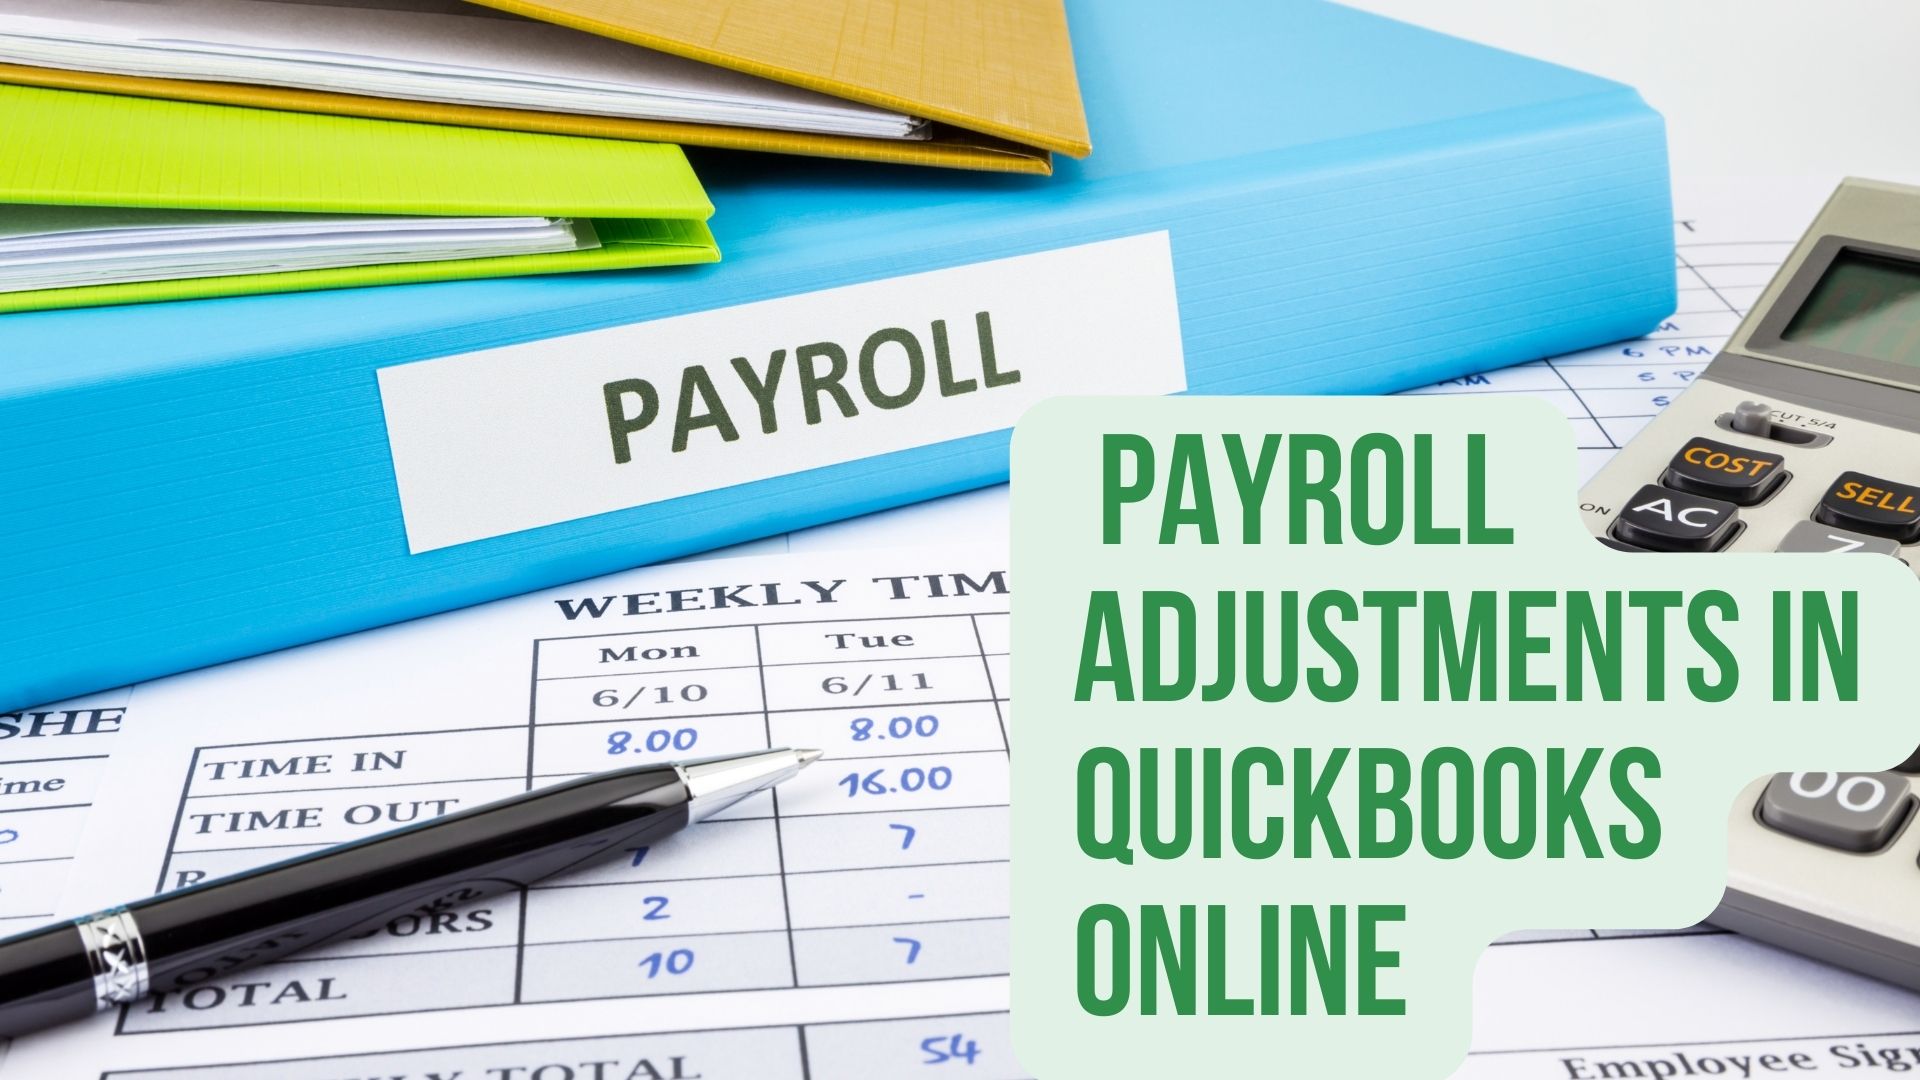 How to Make Payroll Adjustments in Quickbooks Online: Step-by-Step ...